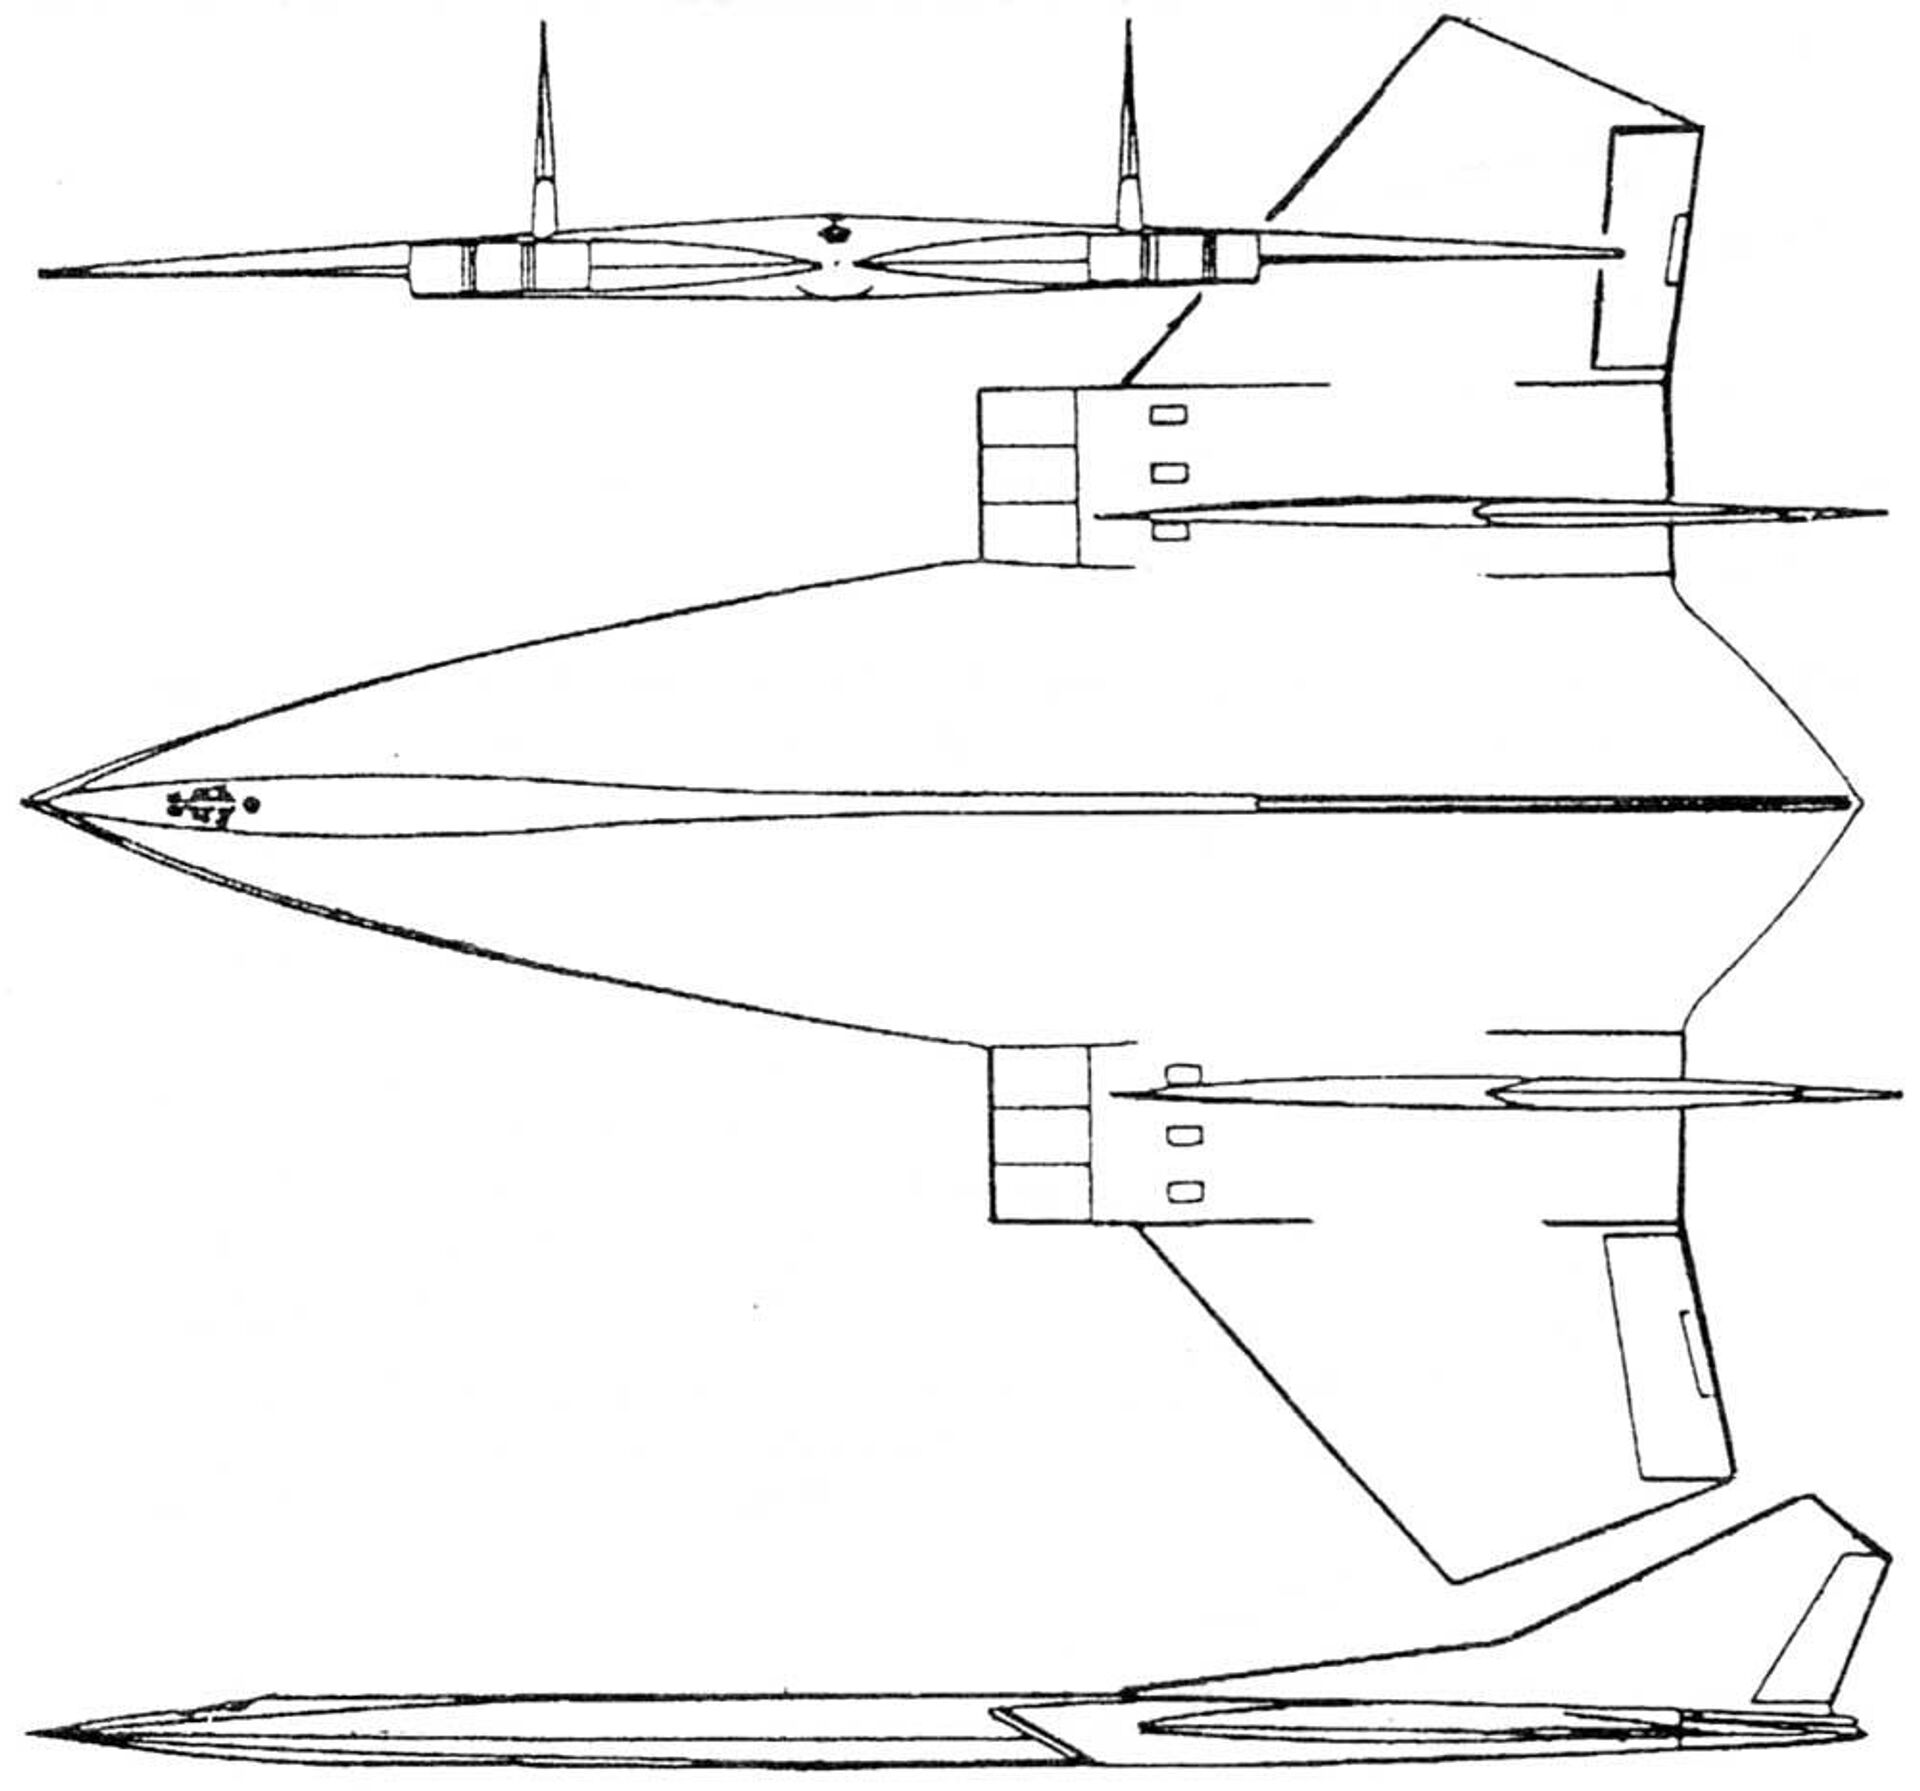 DSB-LK bomber project, developed during the golden age of sleek, highly aerodynamic and futuristic aviation design in the years following the Second World War. - Sputnik International, 1920, 15.12.2023